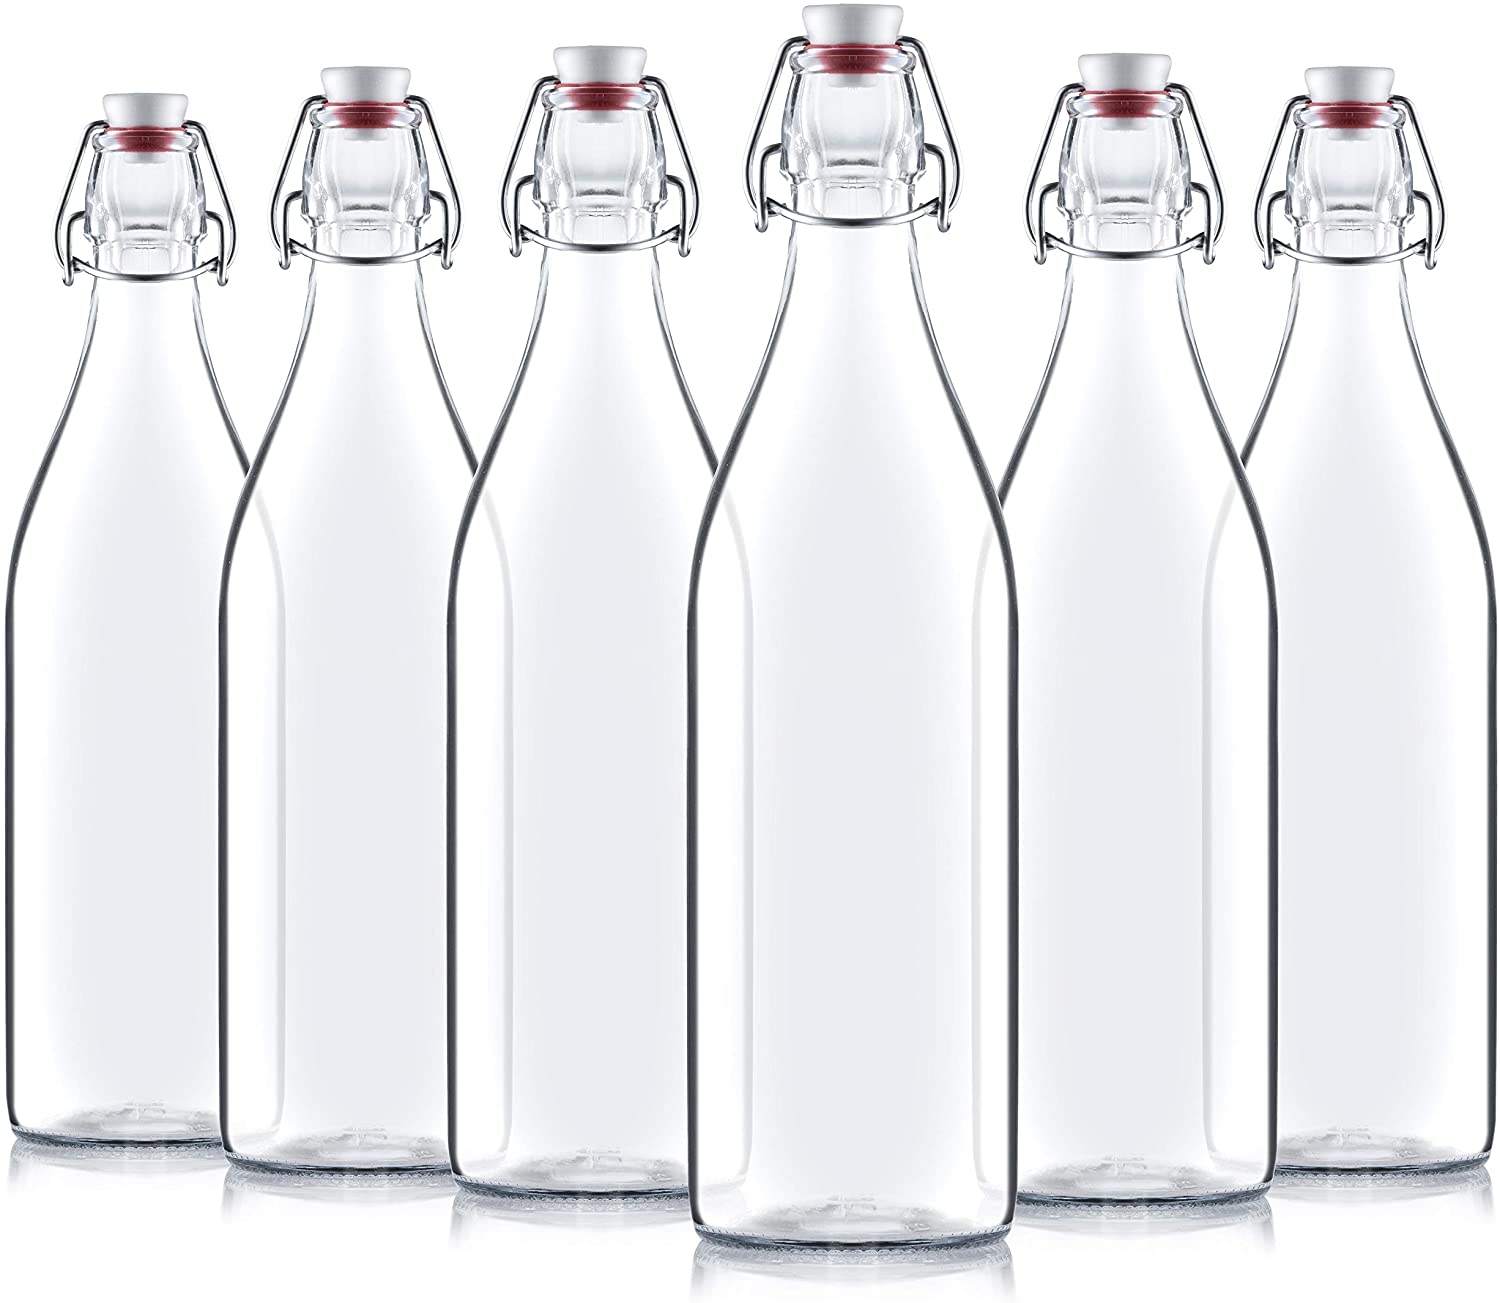 Bormioli Rocco Giara Swing Top Bottles 33  Ounce/1 Liter (6 Pack) ROUND Clear Glass Grolsch Flip Top Bottle With Stopper - image 1 of 4